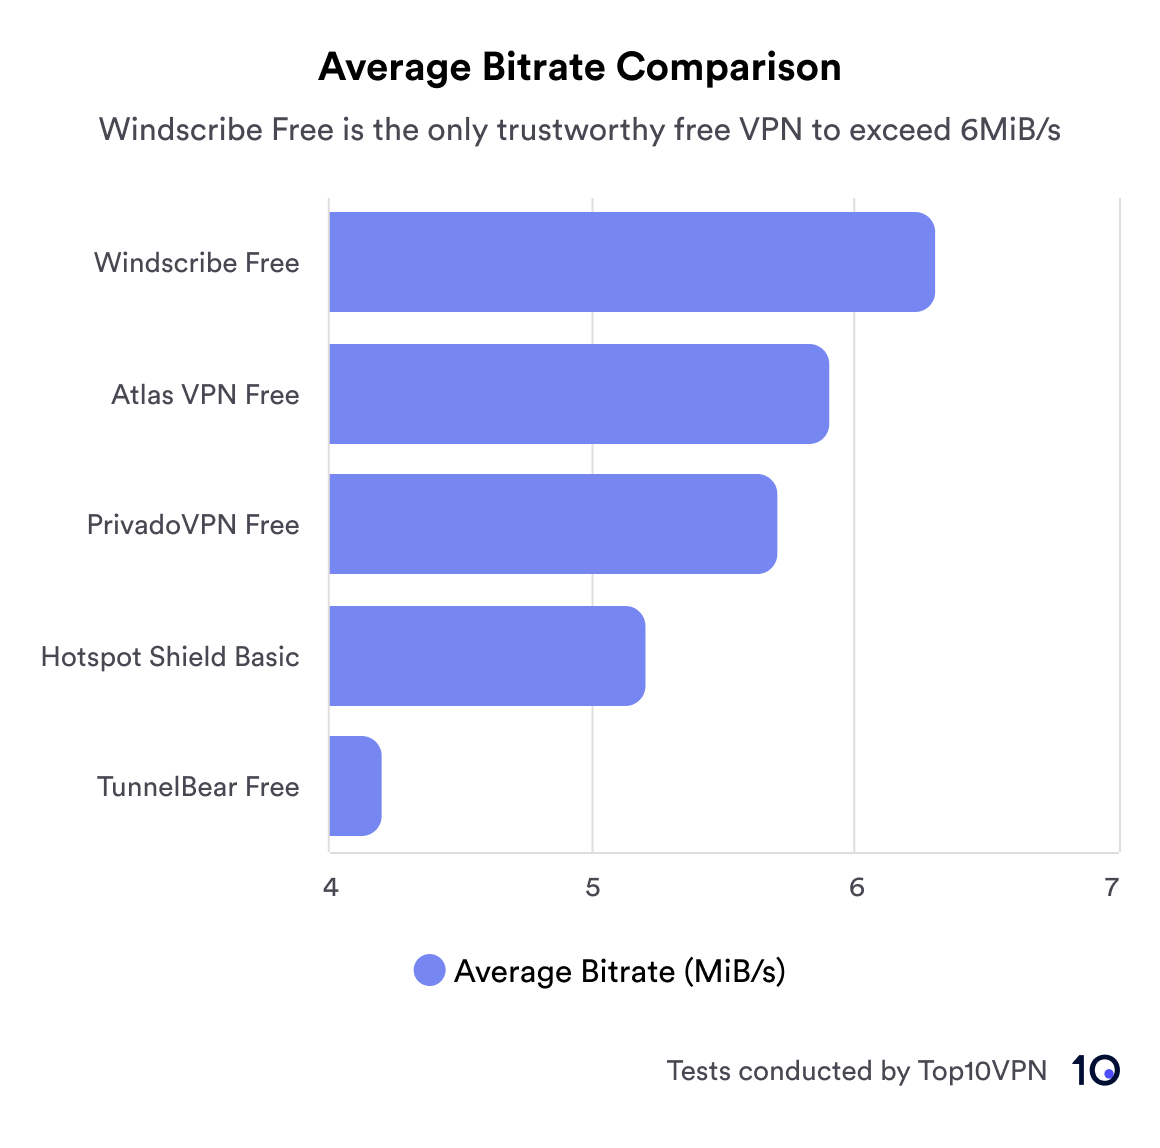 Bar chart comparing the average bitrates of free torrenting VPNs